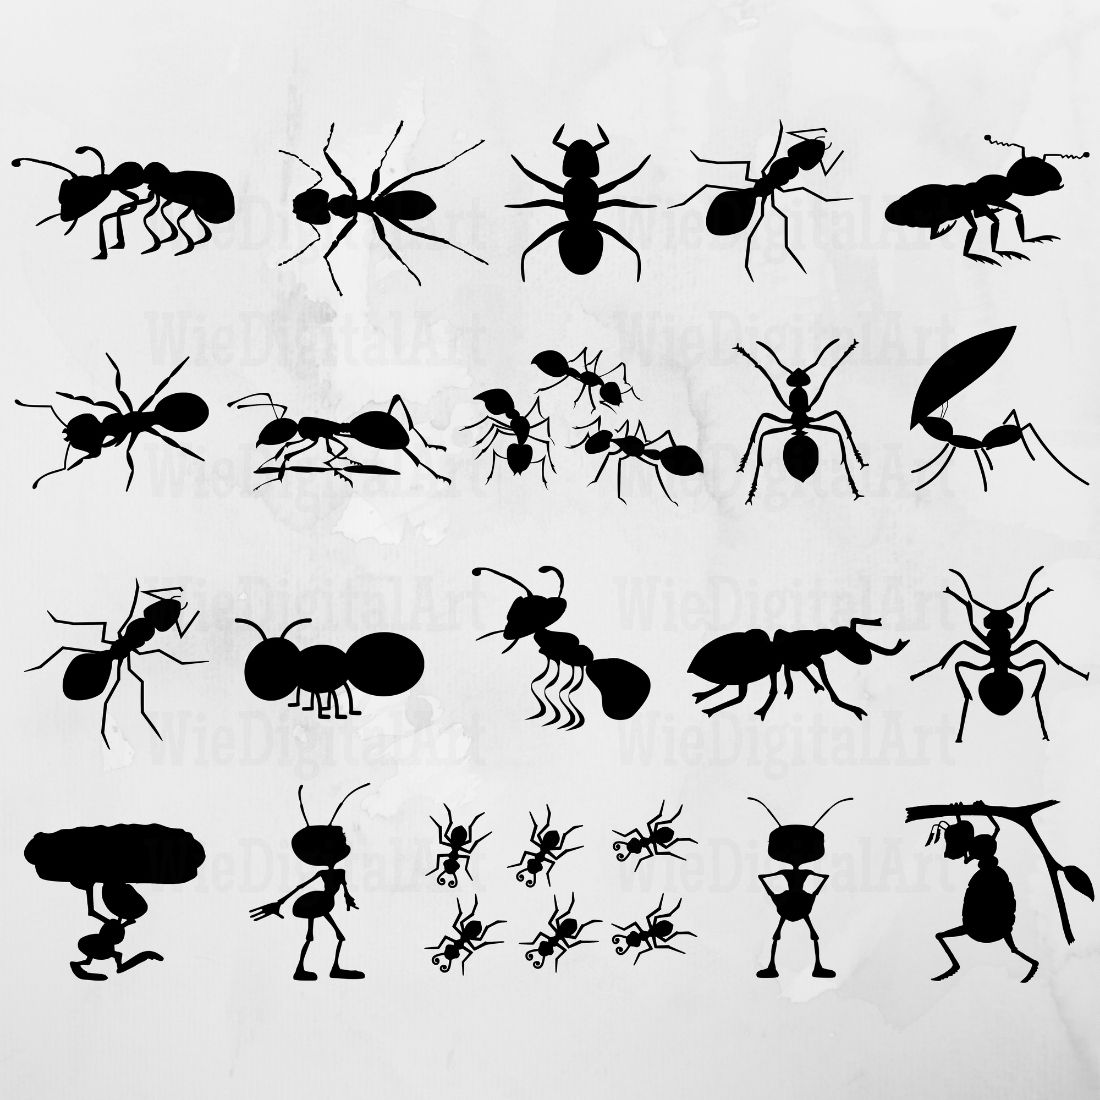 Ant SVG & Ant Silhouette.